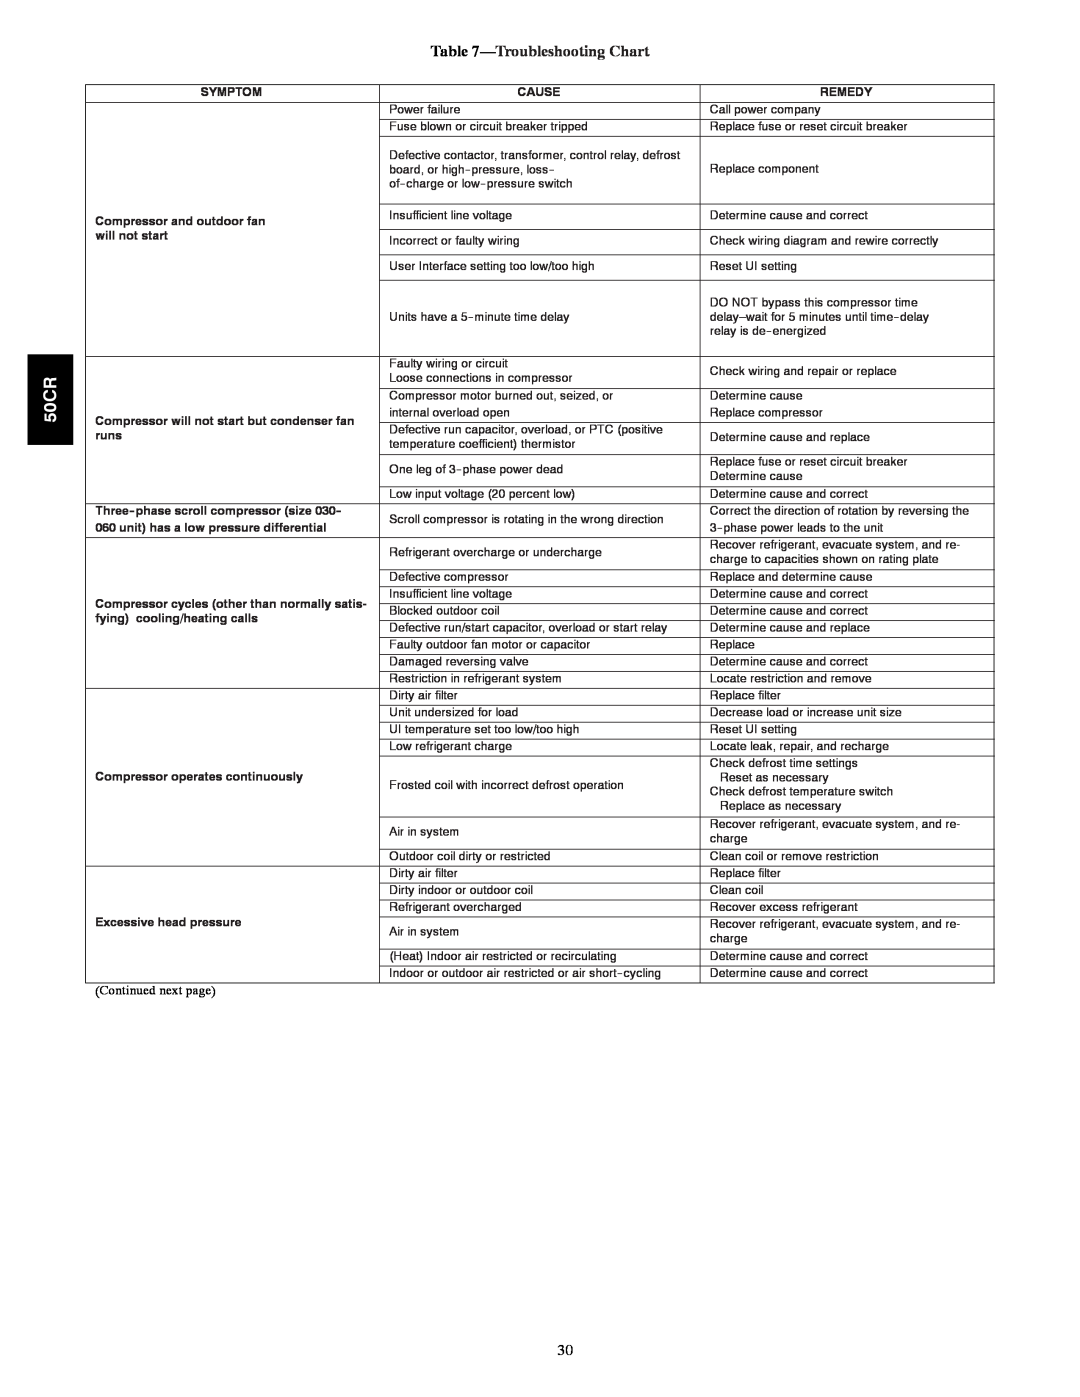 Carrier 50CR installation instructions TroubleshootingChart, Continued next page 